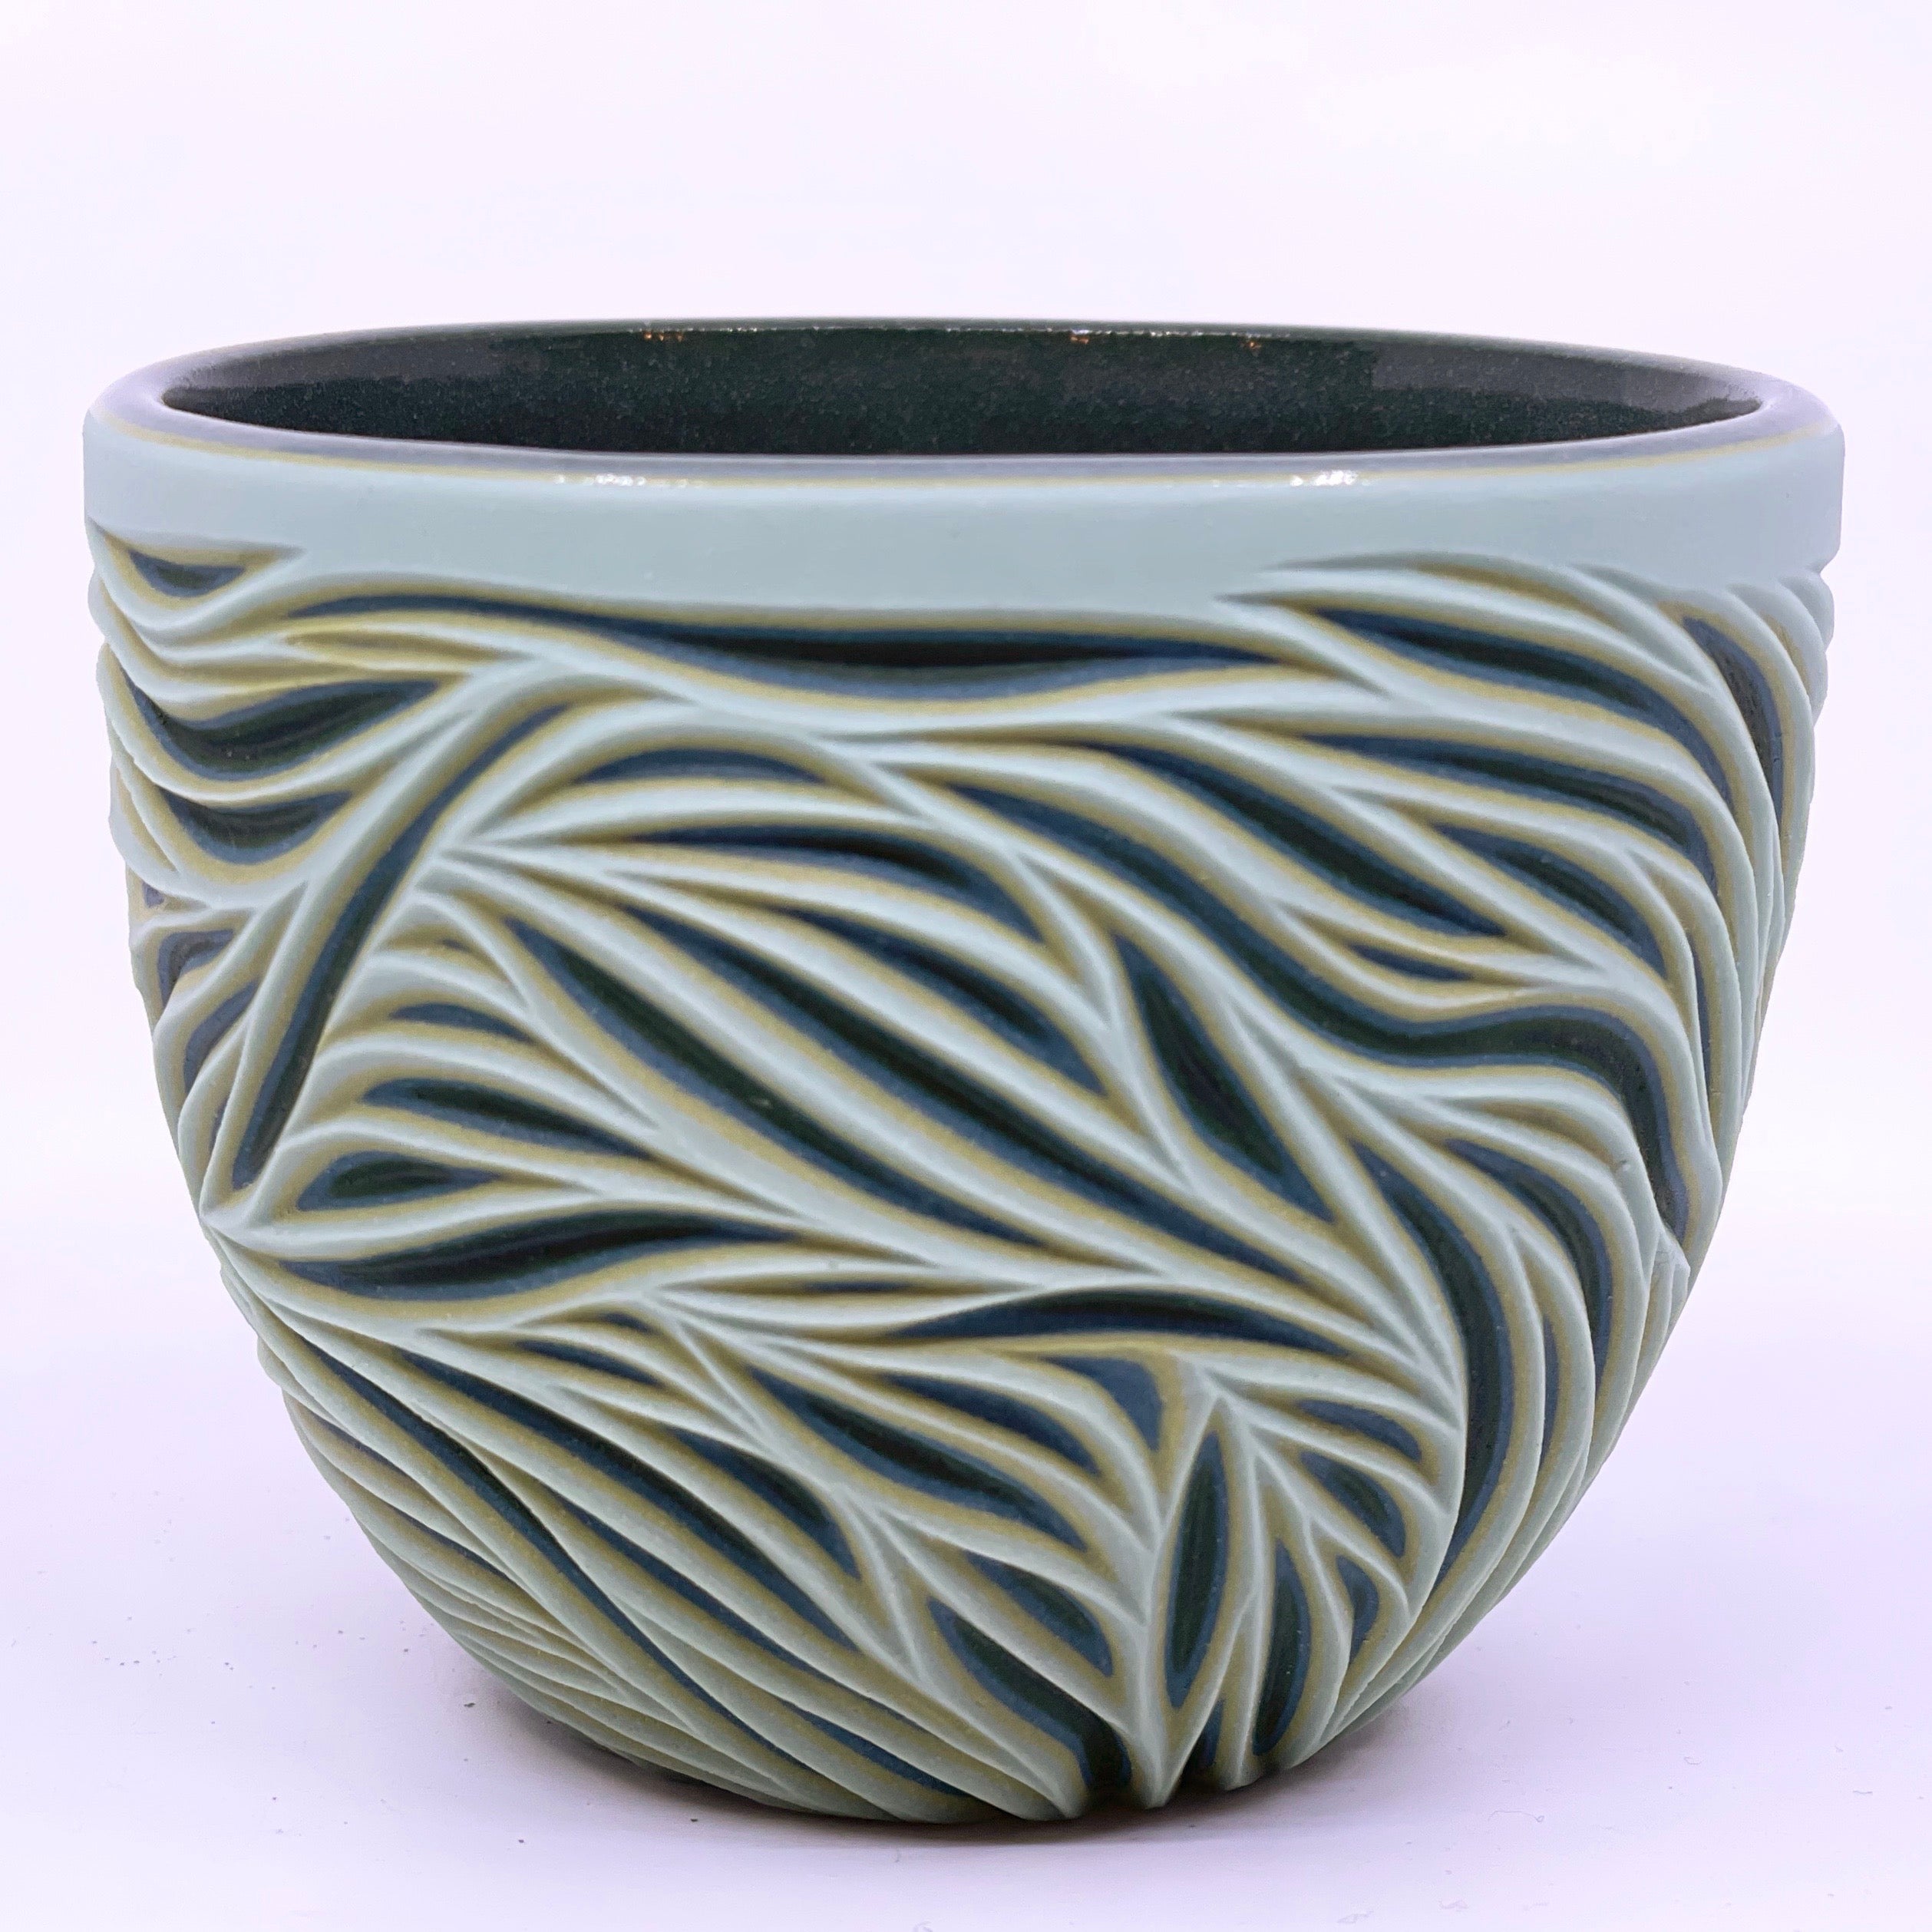 *Preorder*Light green exterior/light green exterior Intricate Carved Teacup (ship in 4-6 weeks)